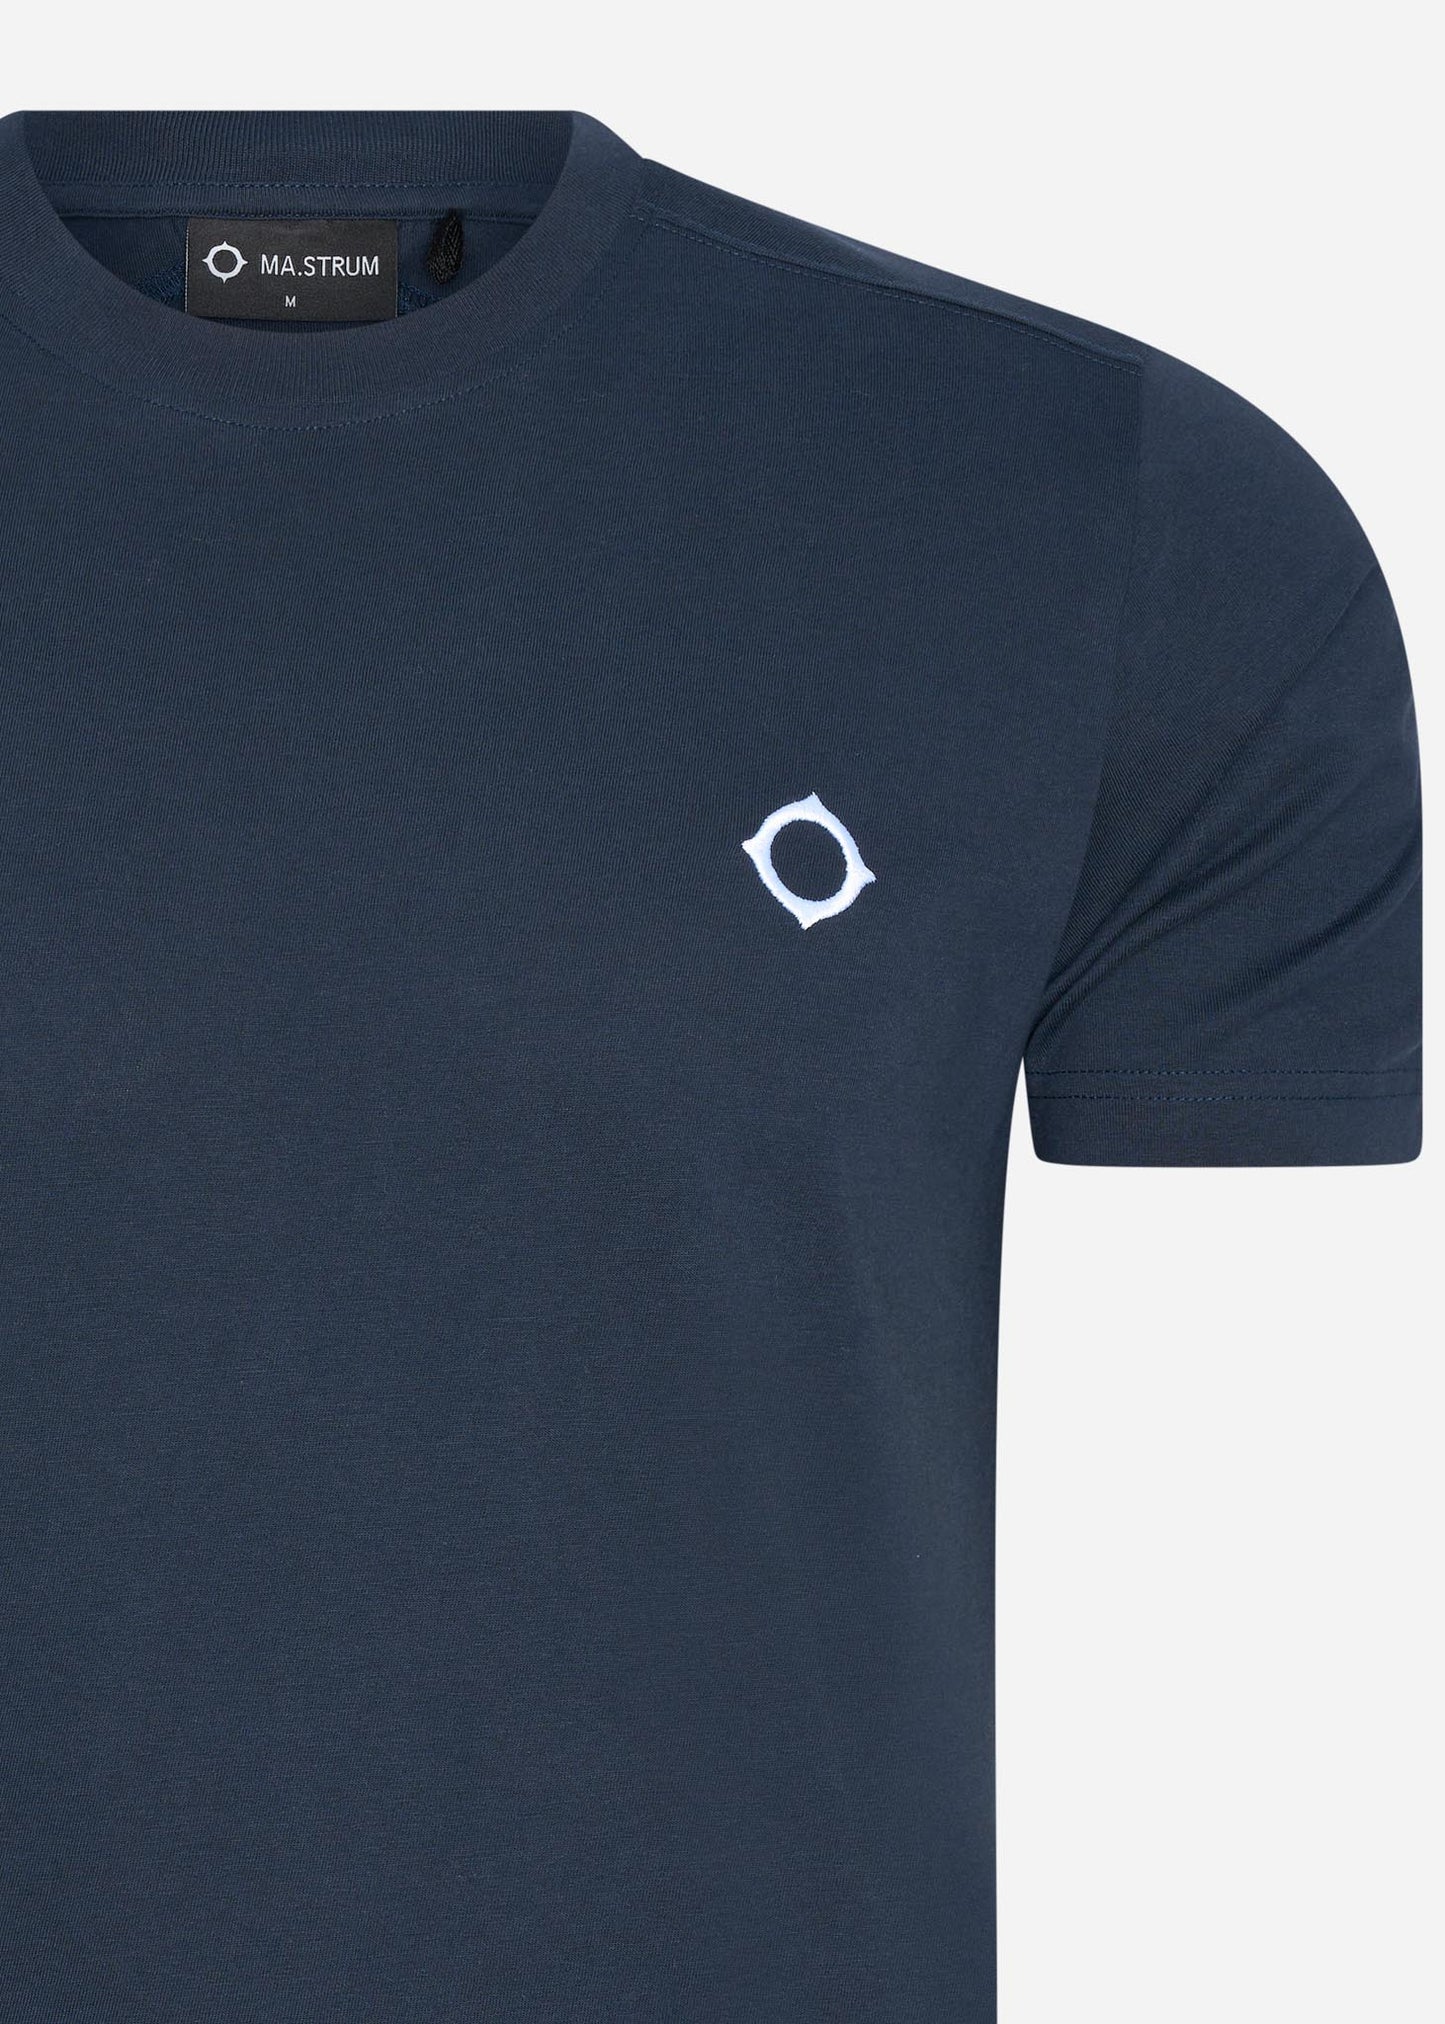 SS icon tee - ink navy - MA.Strum